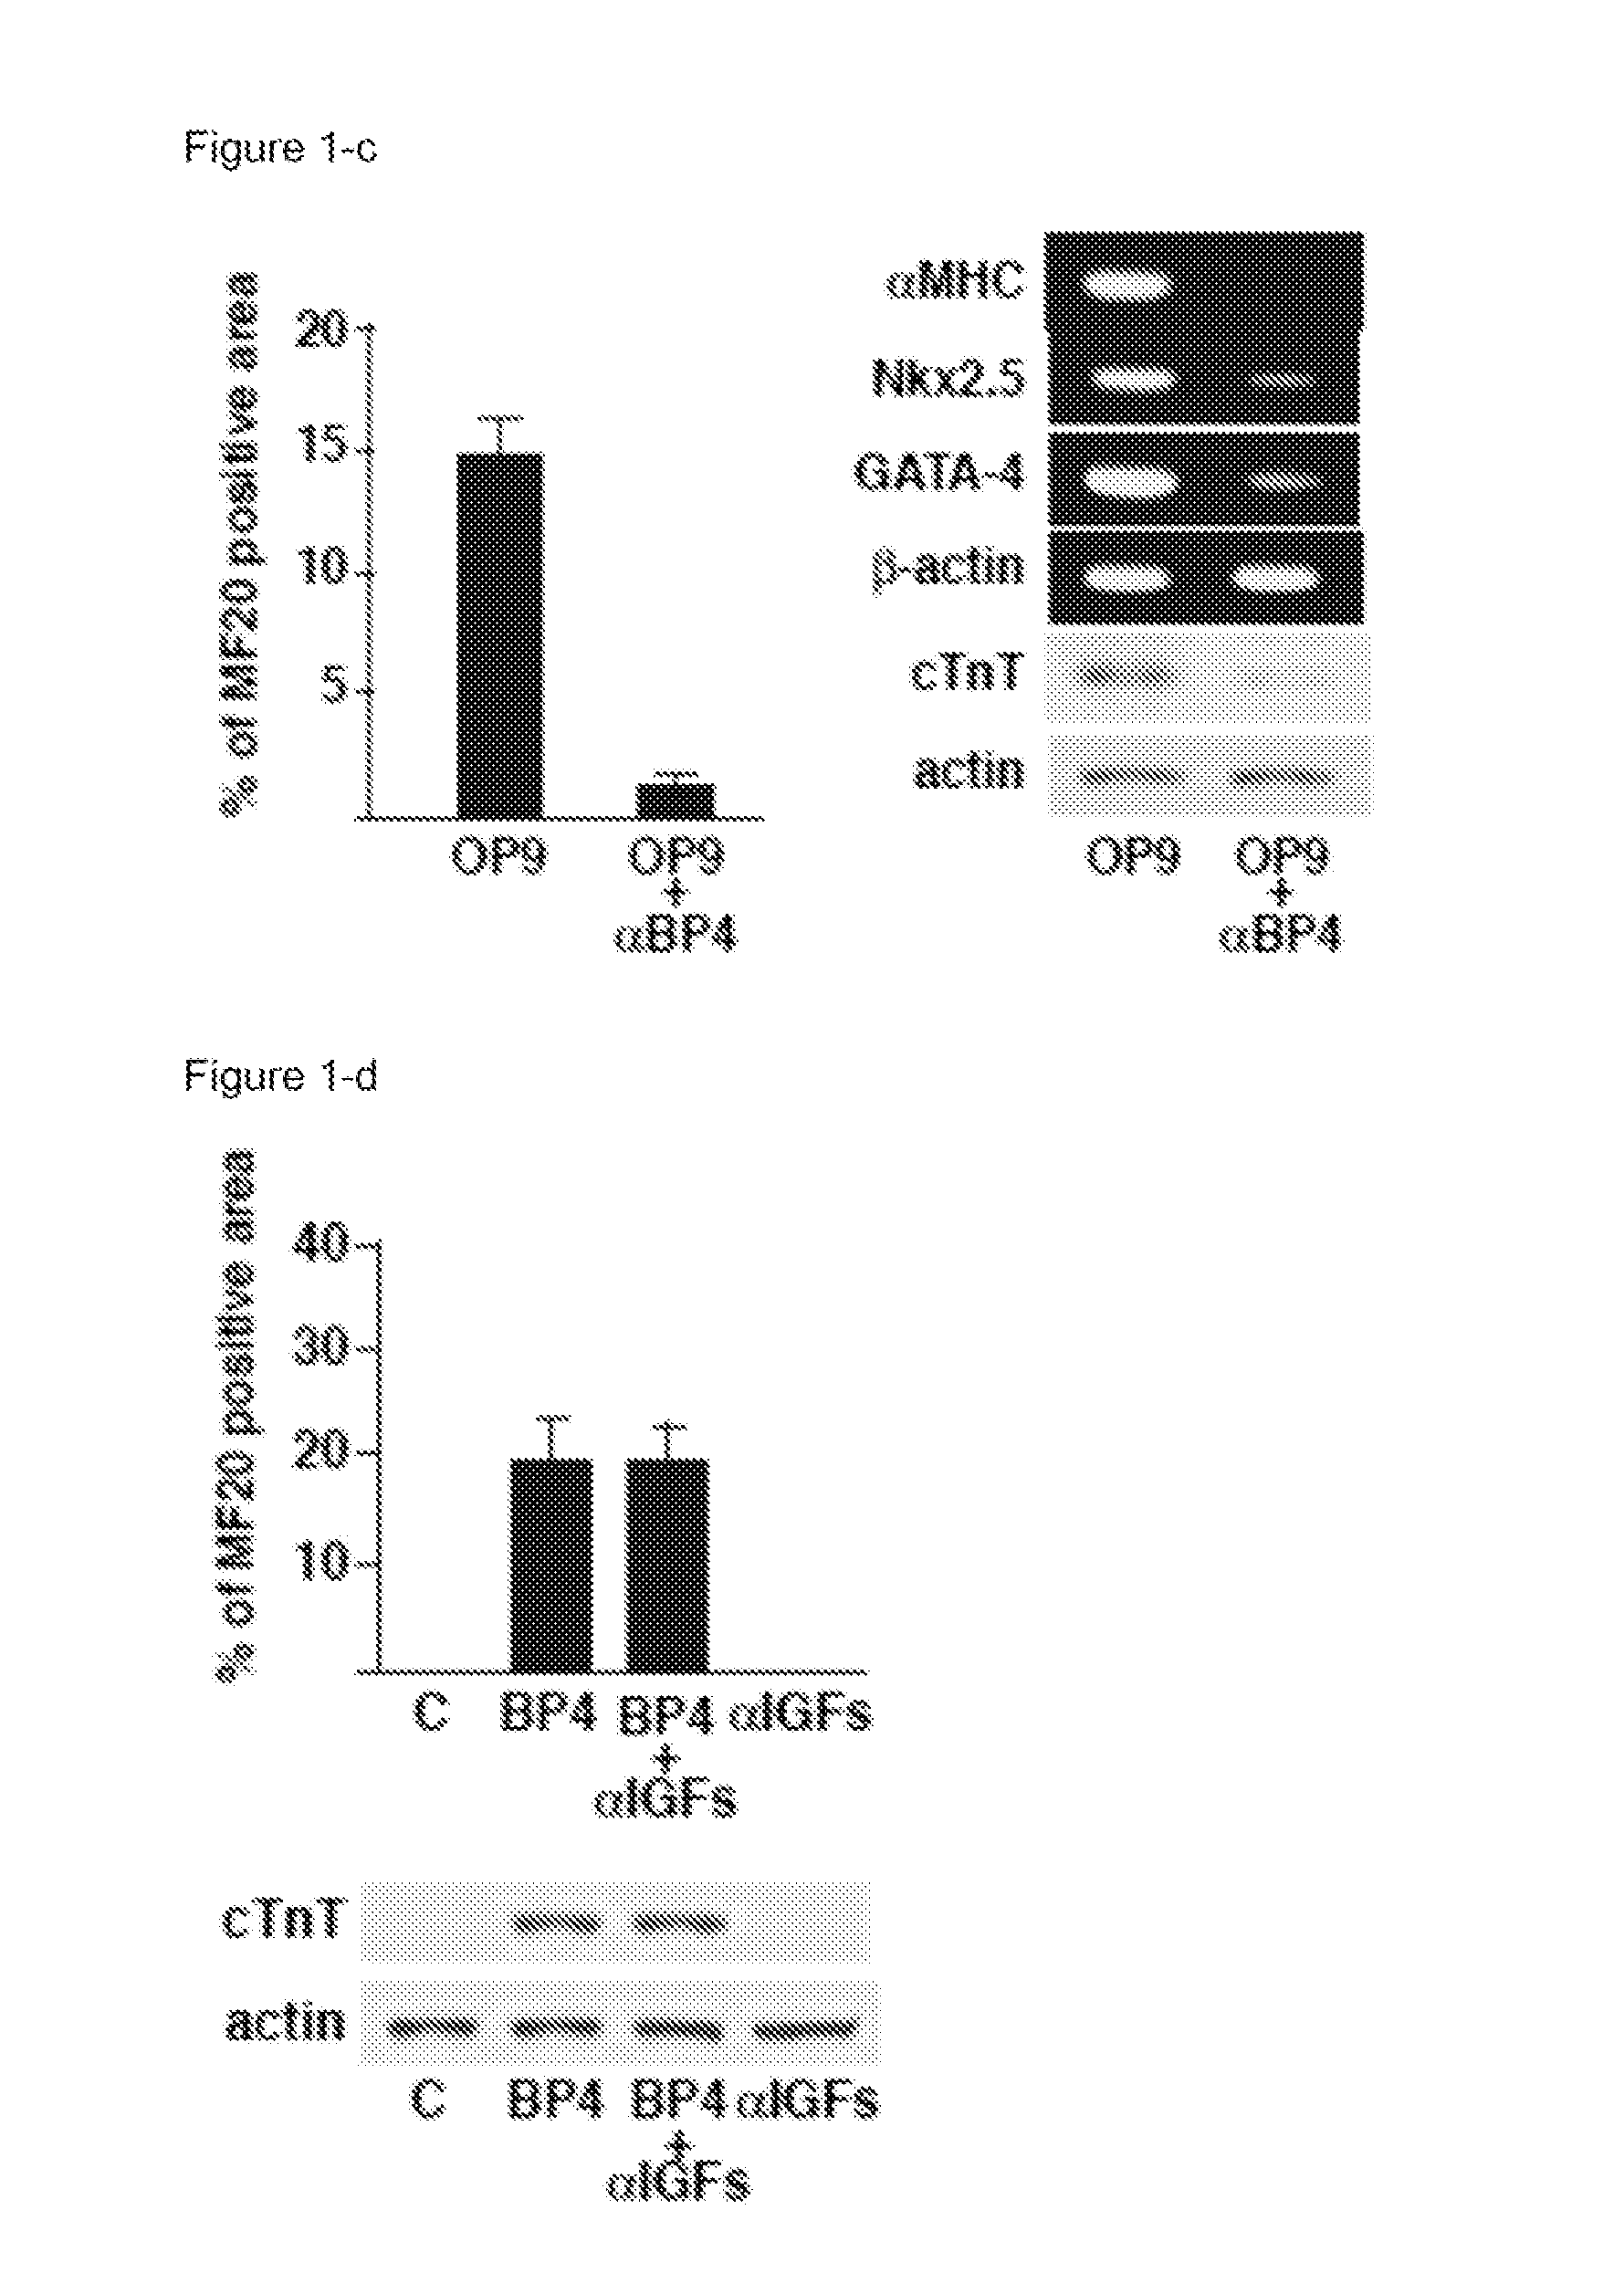 Wnt Signaling Inhibitor Comprising Insulin-Like Growth Factor-Binding Protein